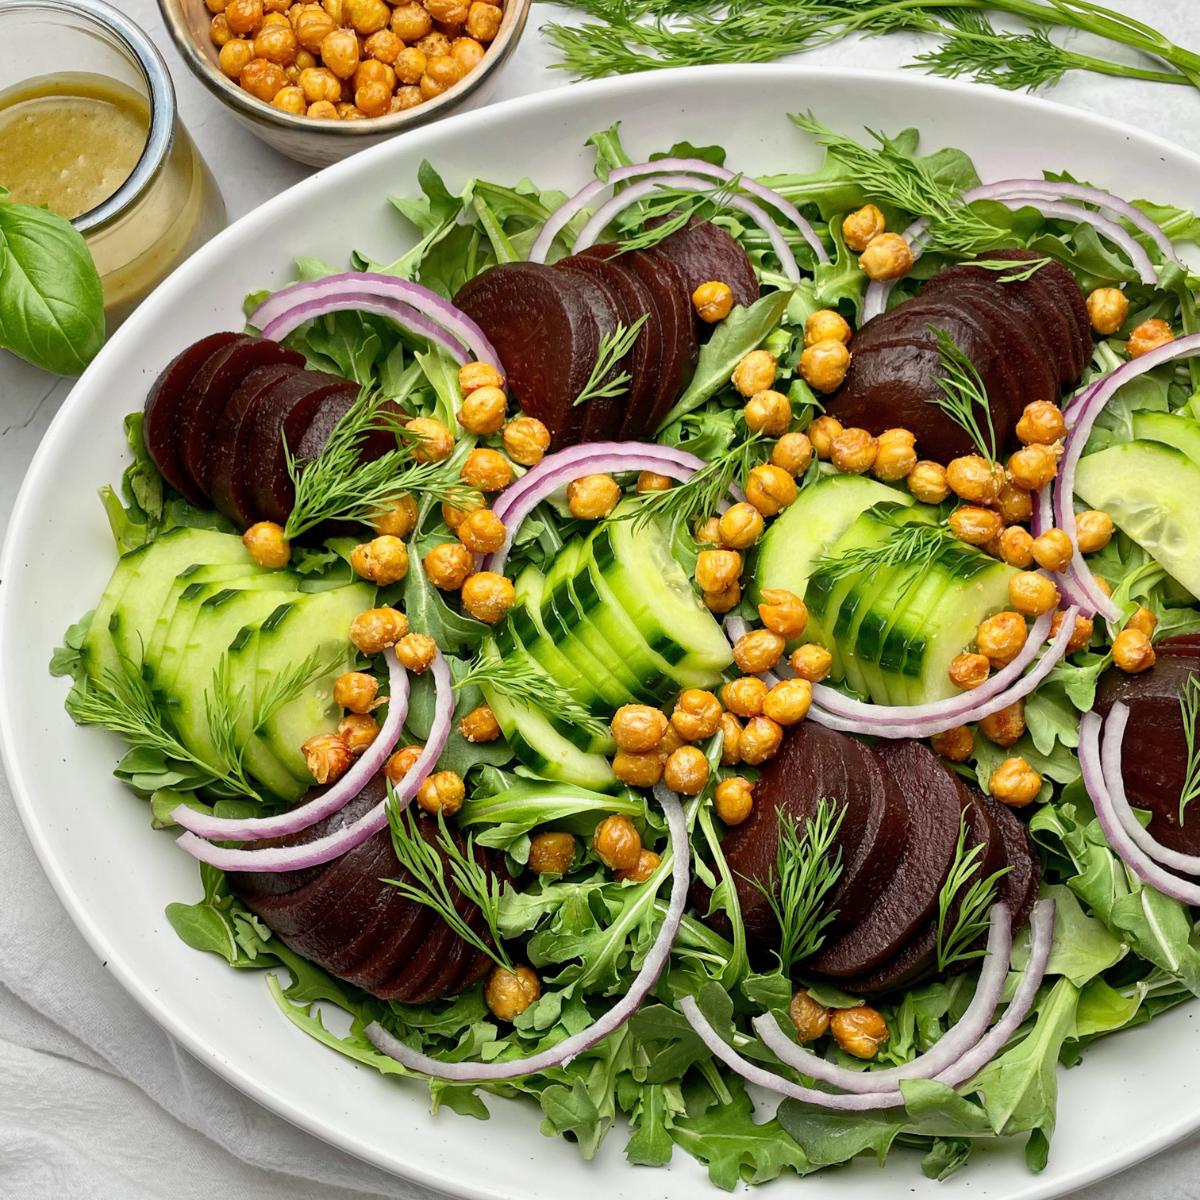 A tray with cucumber beet salad and a side of vinaigrette.